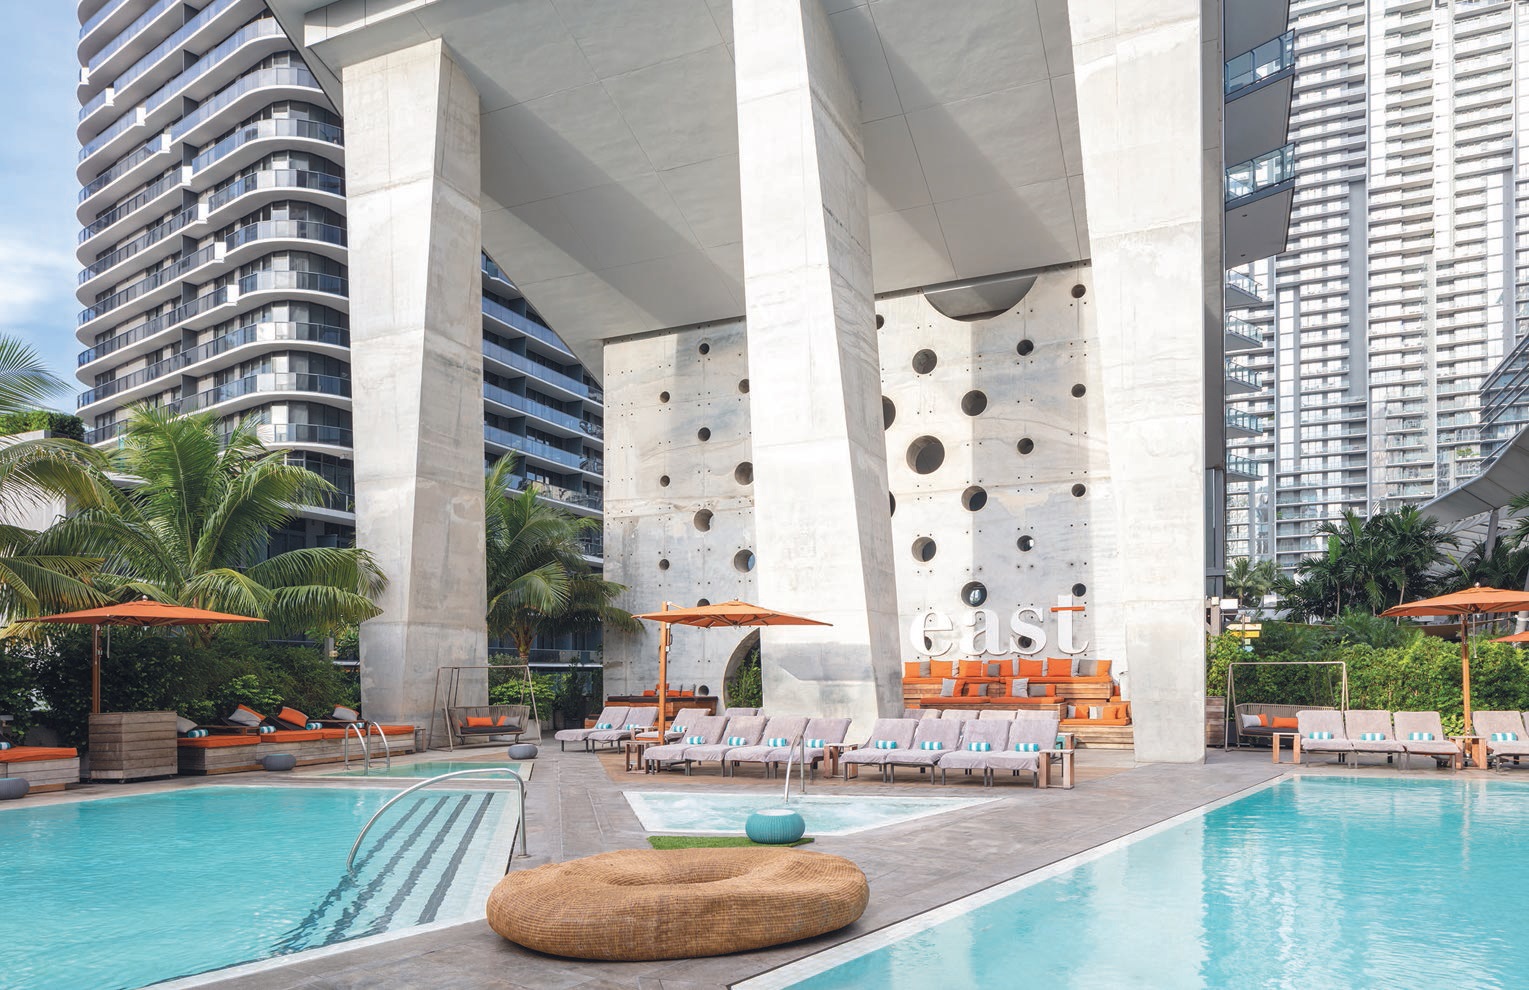 The pool at EAST Miami keeps in theme of the property’s feng shui-driven design PHOTO COURTESY OF: EAST MIAMI